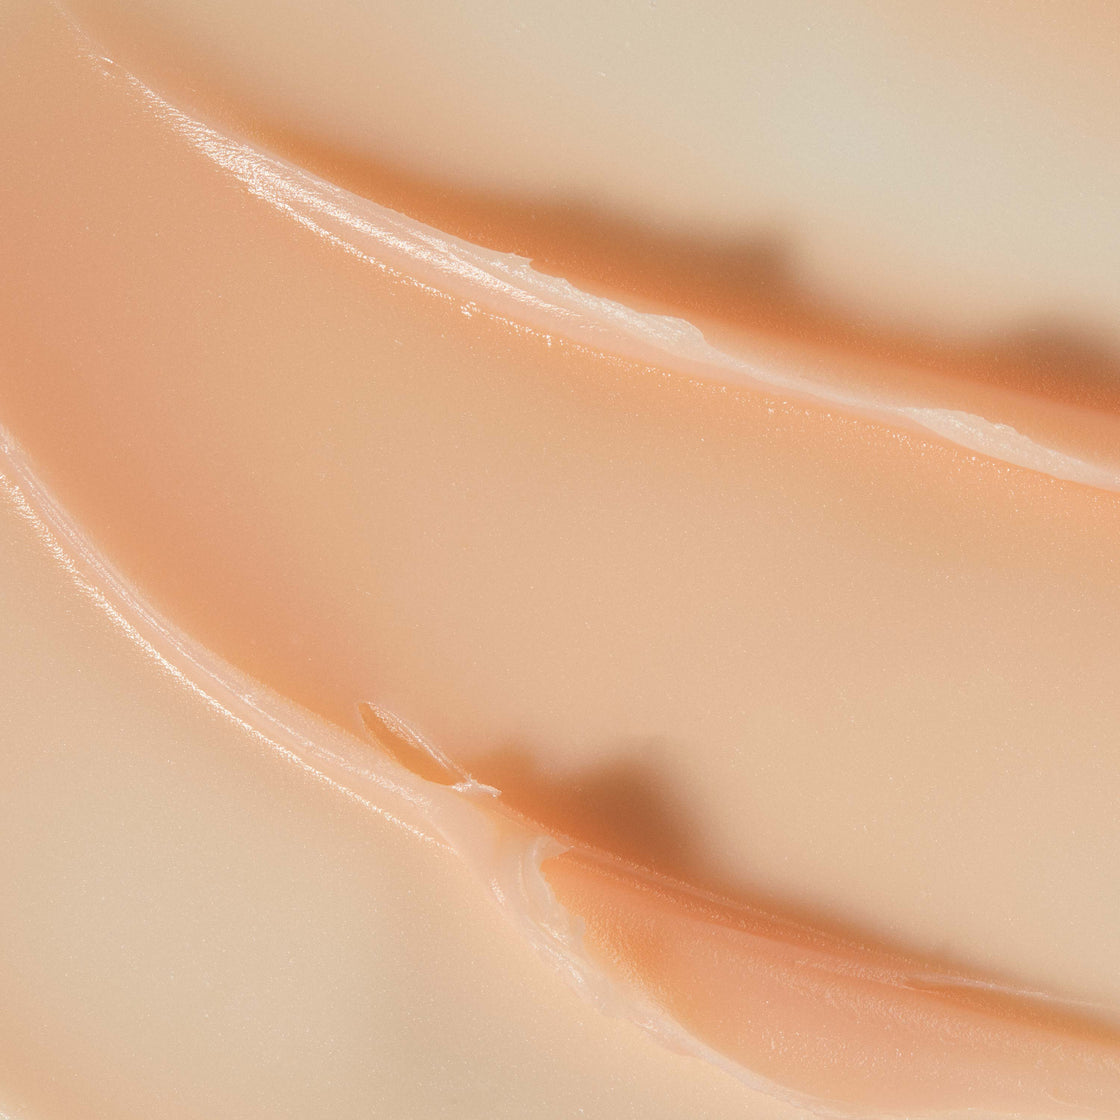 A close up of texture of Queen Cream. Luxurious creamy texture with a soft pink colour.